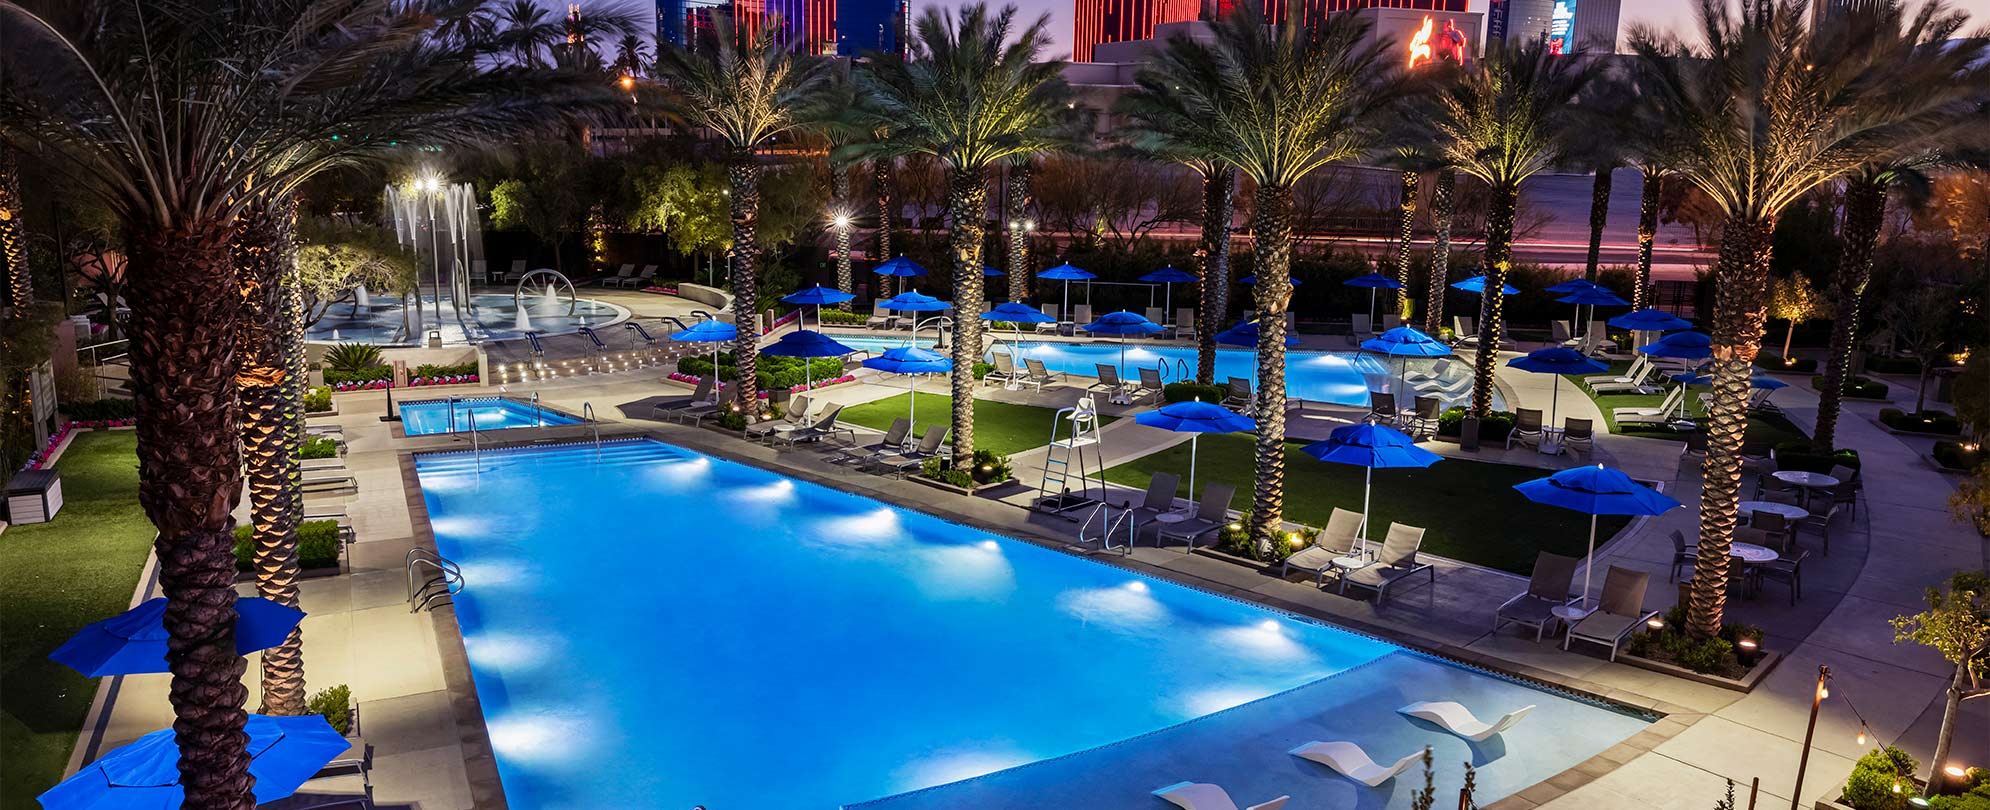 Pools lit up at night surrounded by palm trees at the Margaritaville Vacation Club by Wyndham - Desert Blue in Las Vegas, NV.